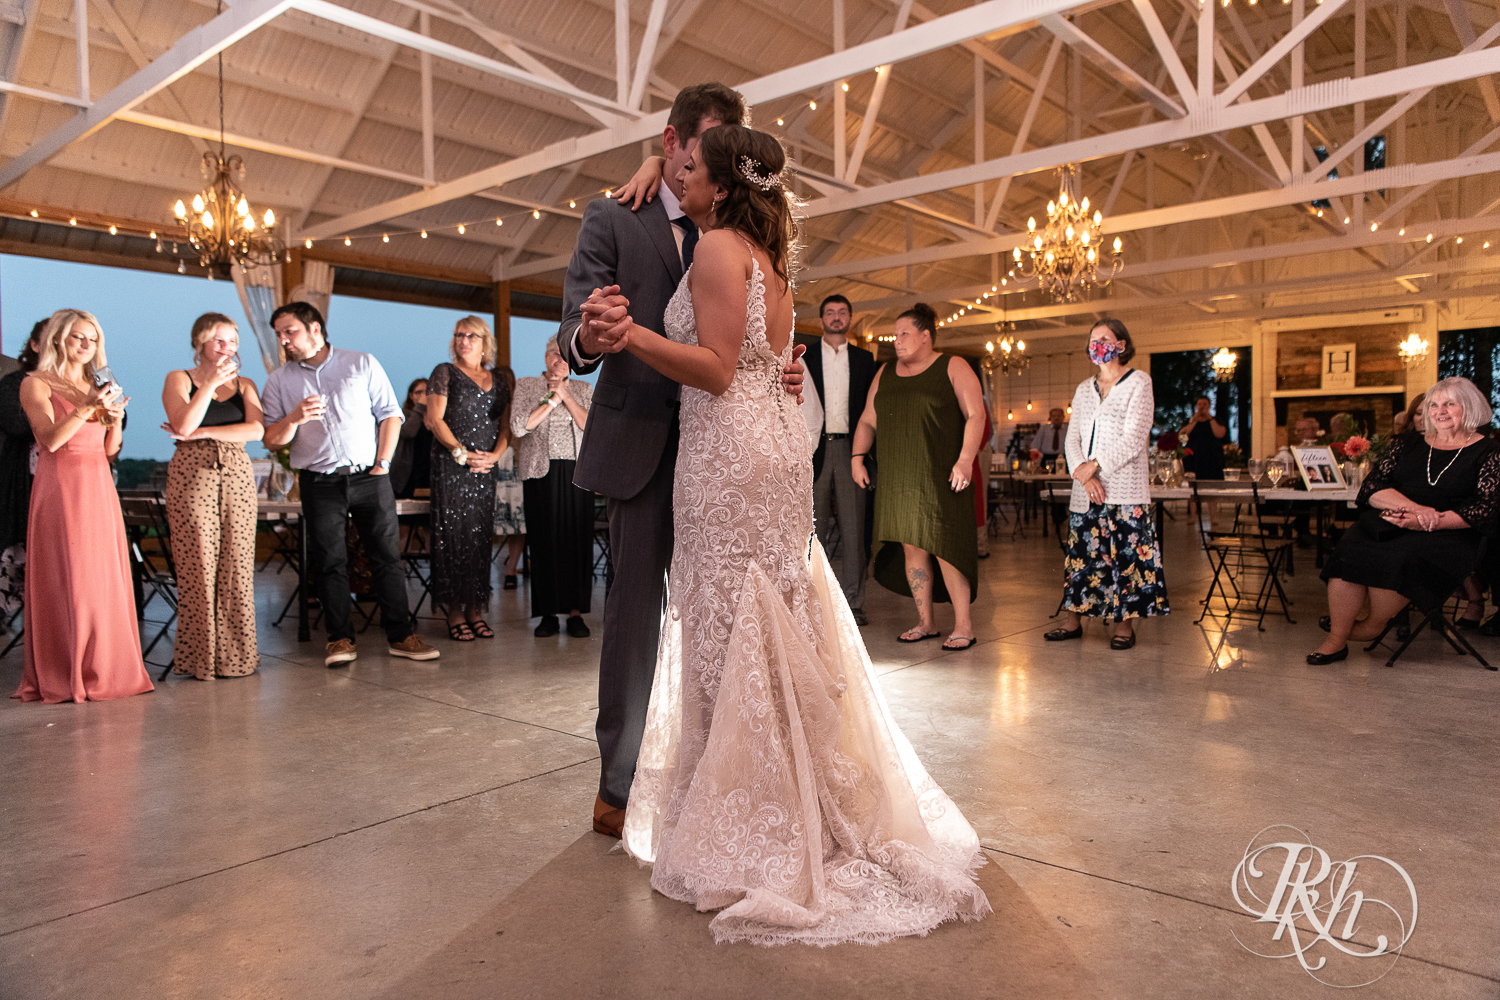 Bride and groom share first dance at wedding reception at Legacy Hills Farm in Welch, Minnesota.